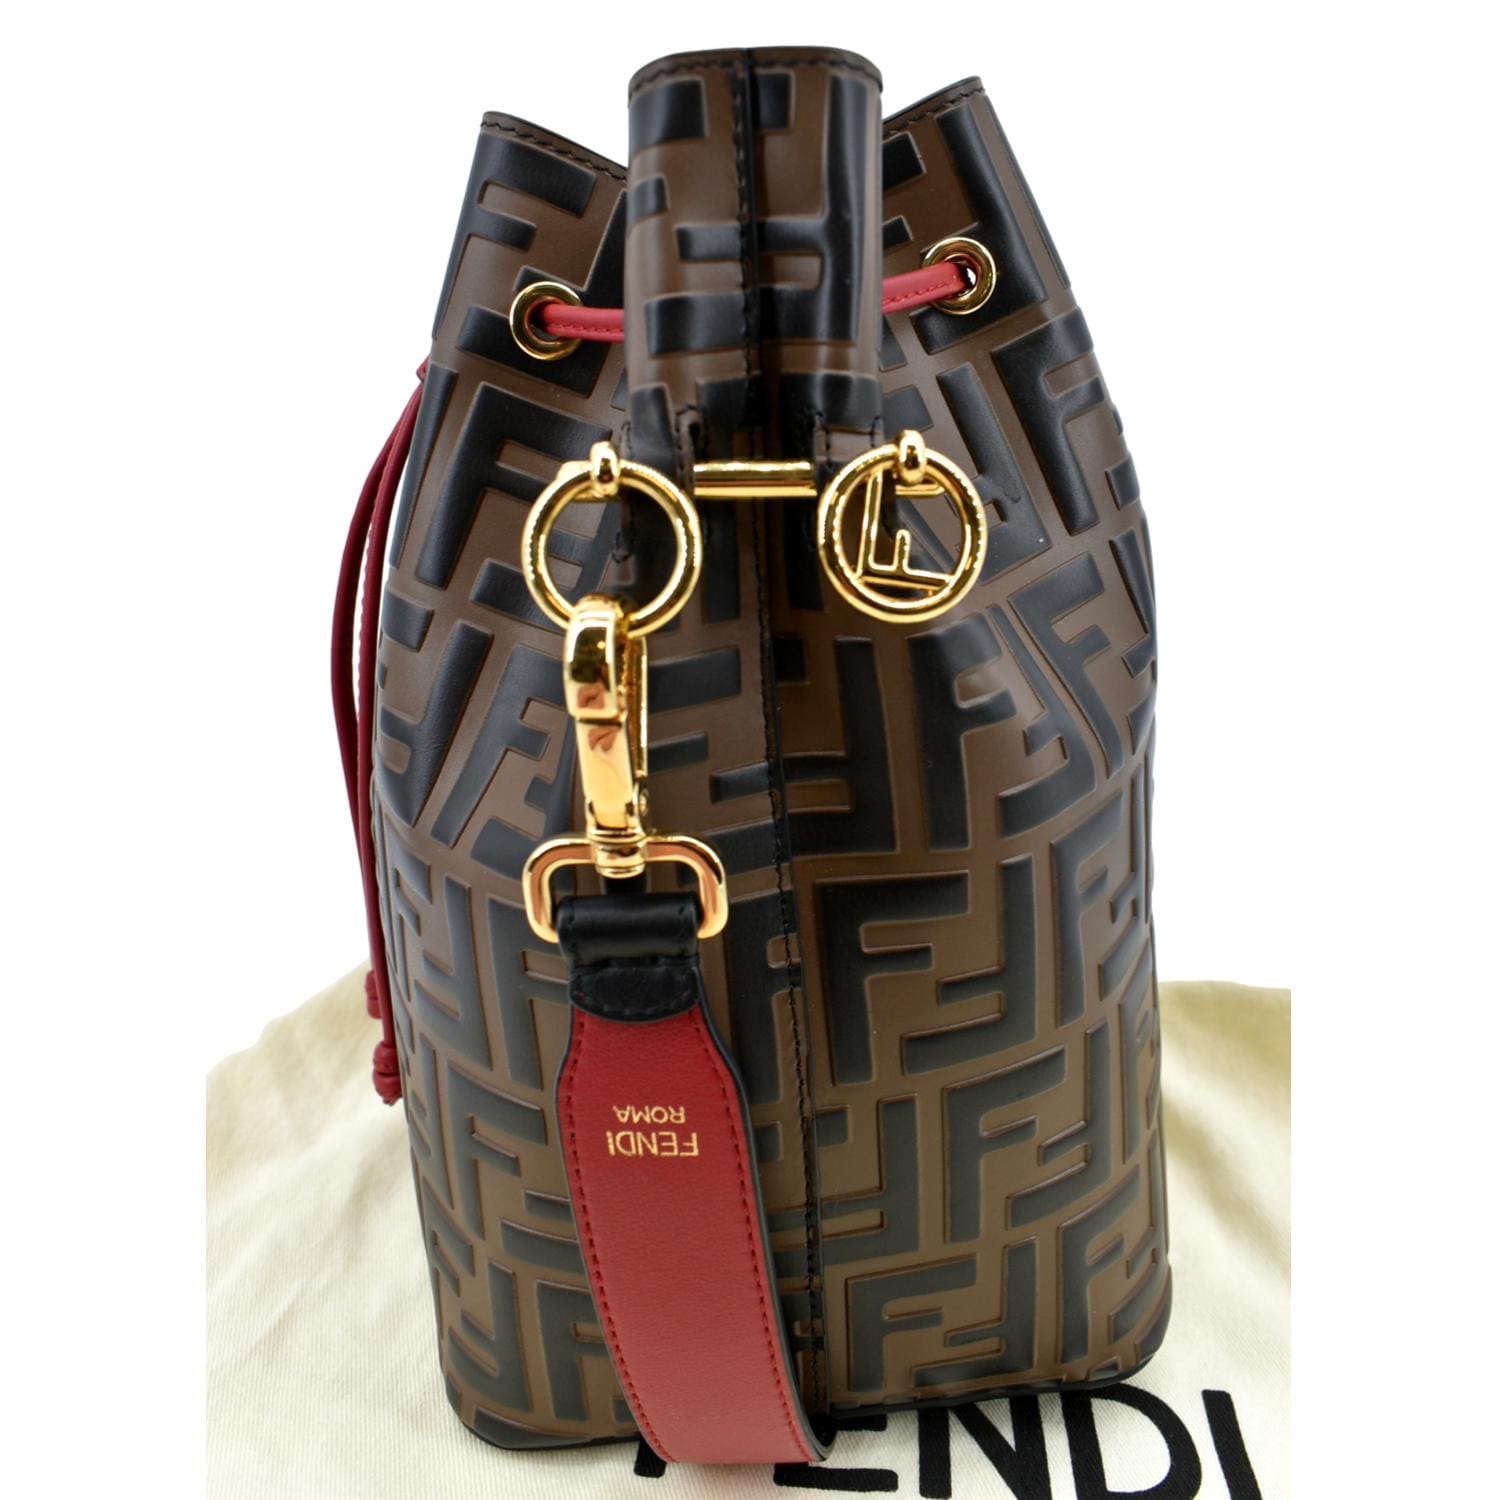 Fendi FF Mon Tresor Bucket Bags with -Gold Hardware-are ready at